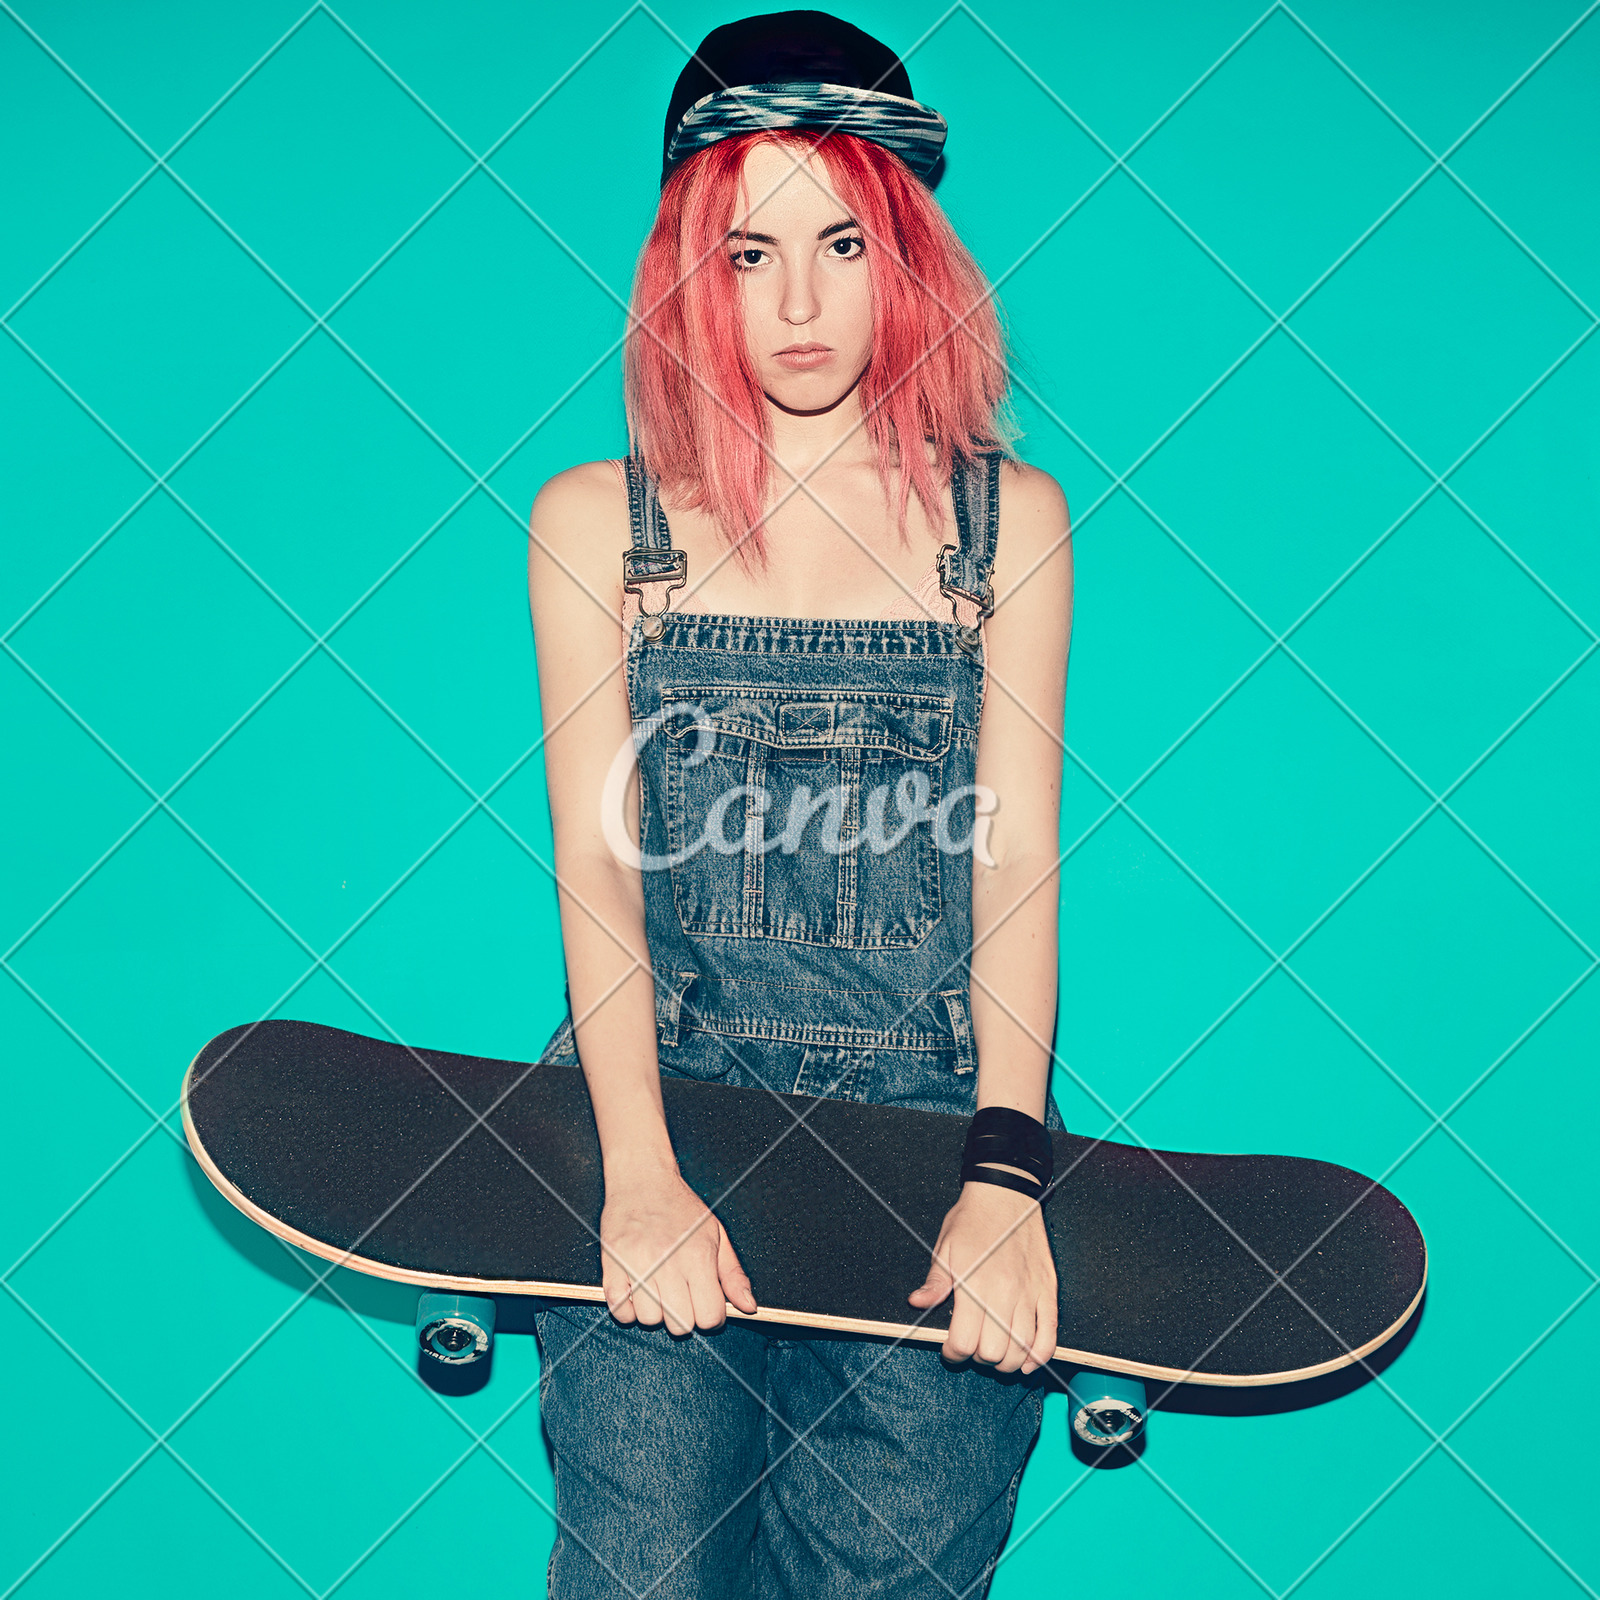 Stylish Urban Skate Girl Fancy Pink Hairstyle Photos By Canva